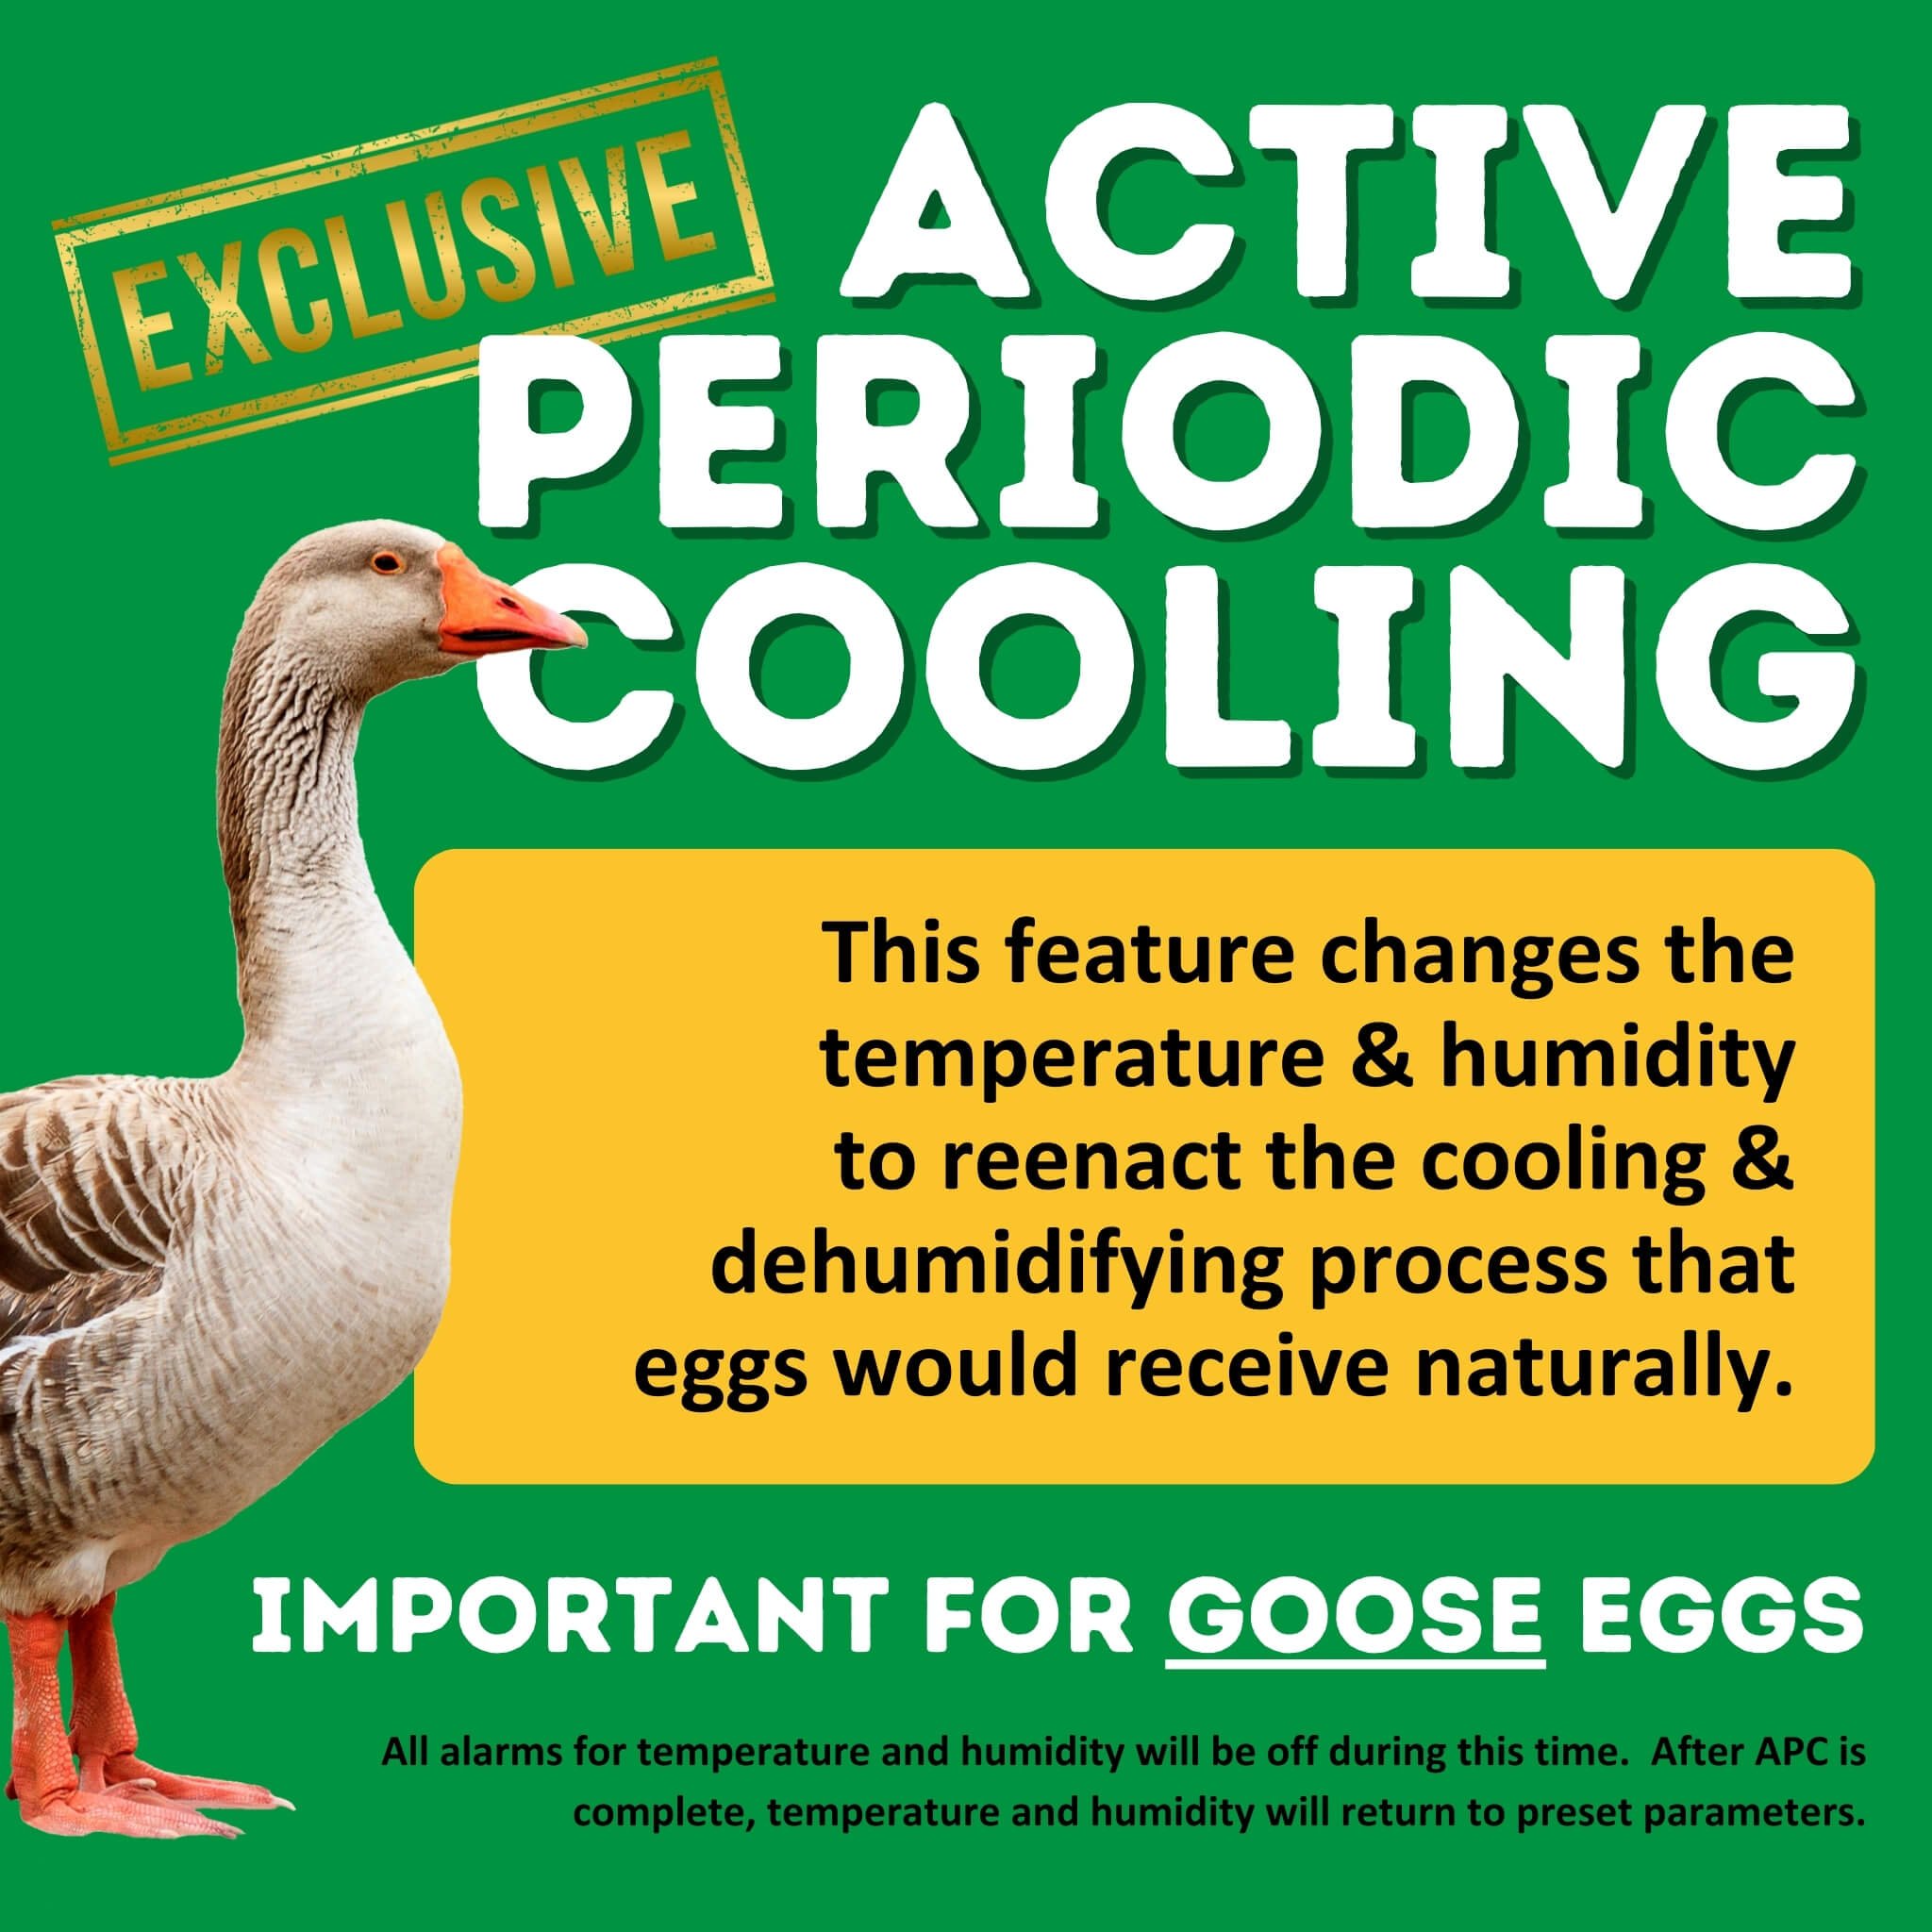 Hatching Time Cimuka. Infographic showcasing active periodic cooling. A goose is shown in the image to show the importance of cooling for goose egg hatching. 